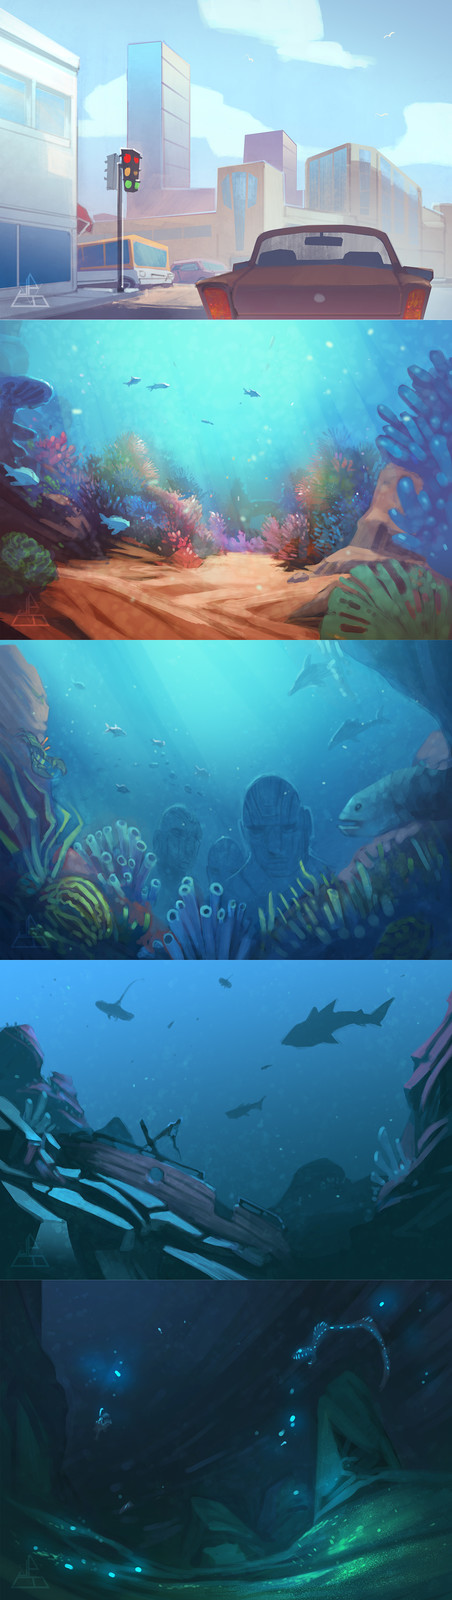 Colour and lighting concepts for surface environment through to ocean floor.